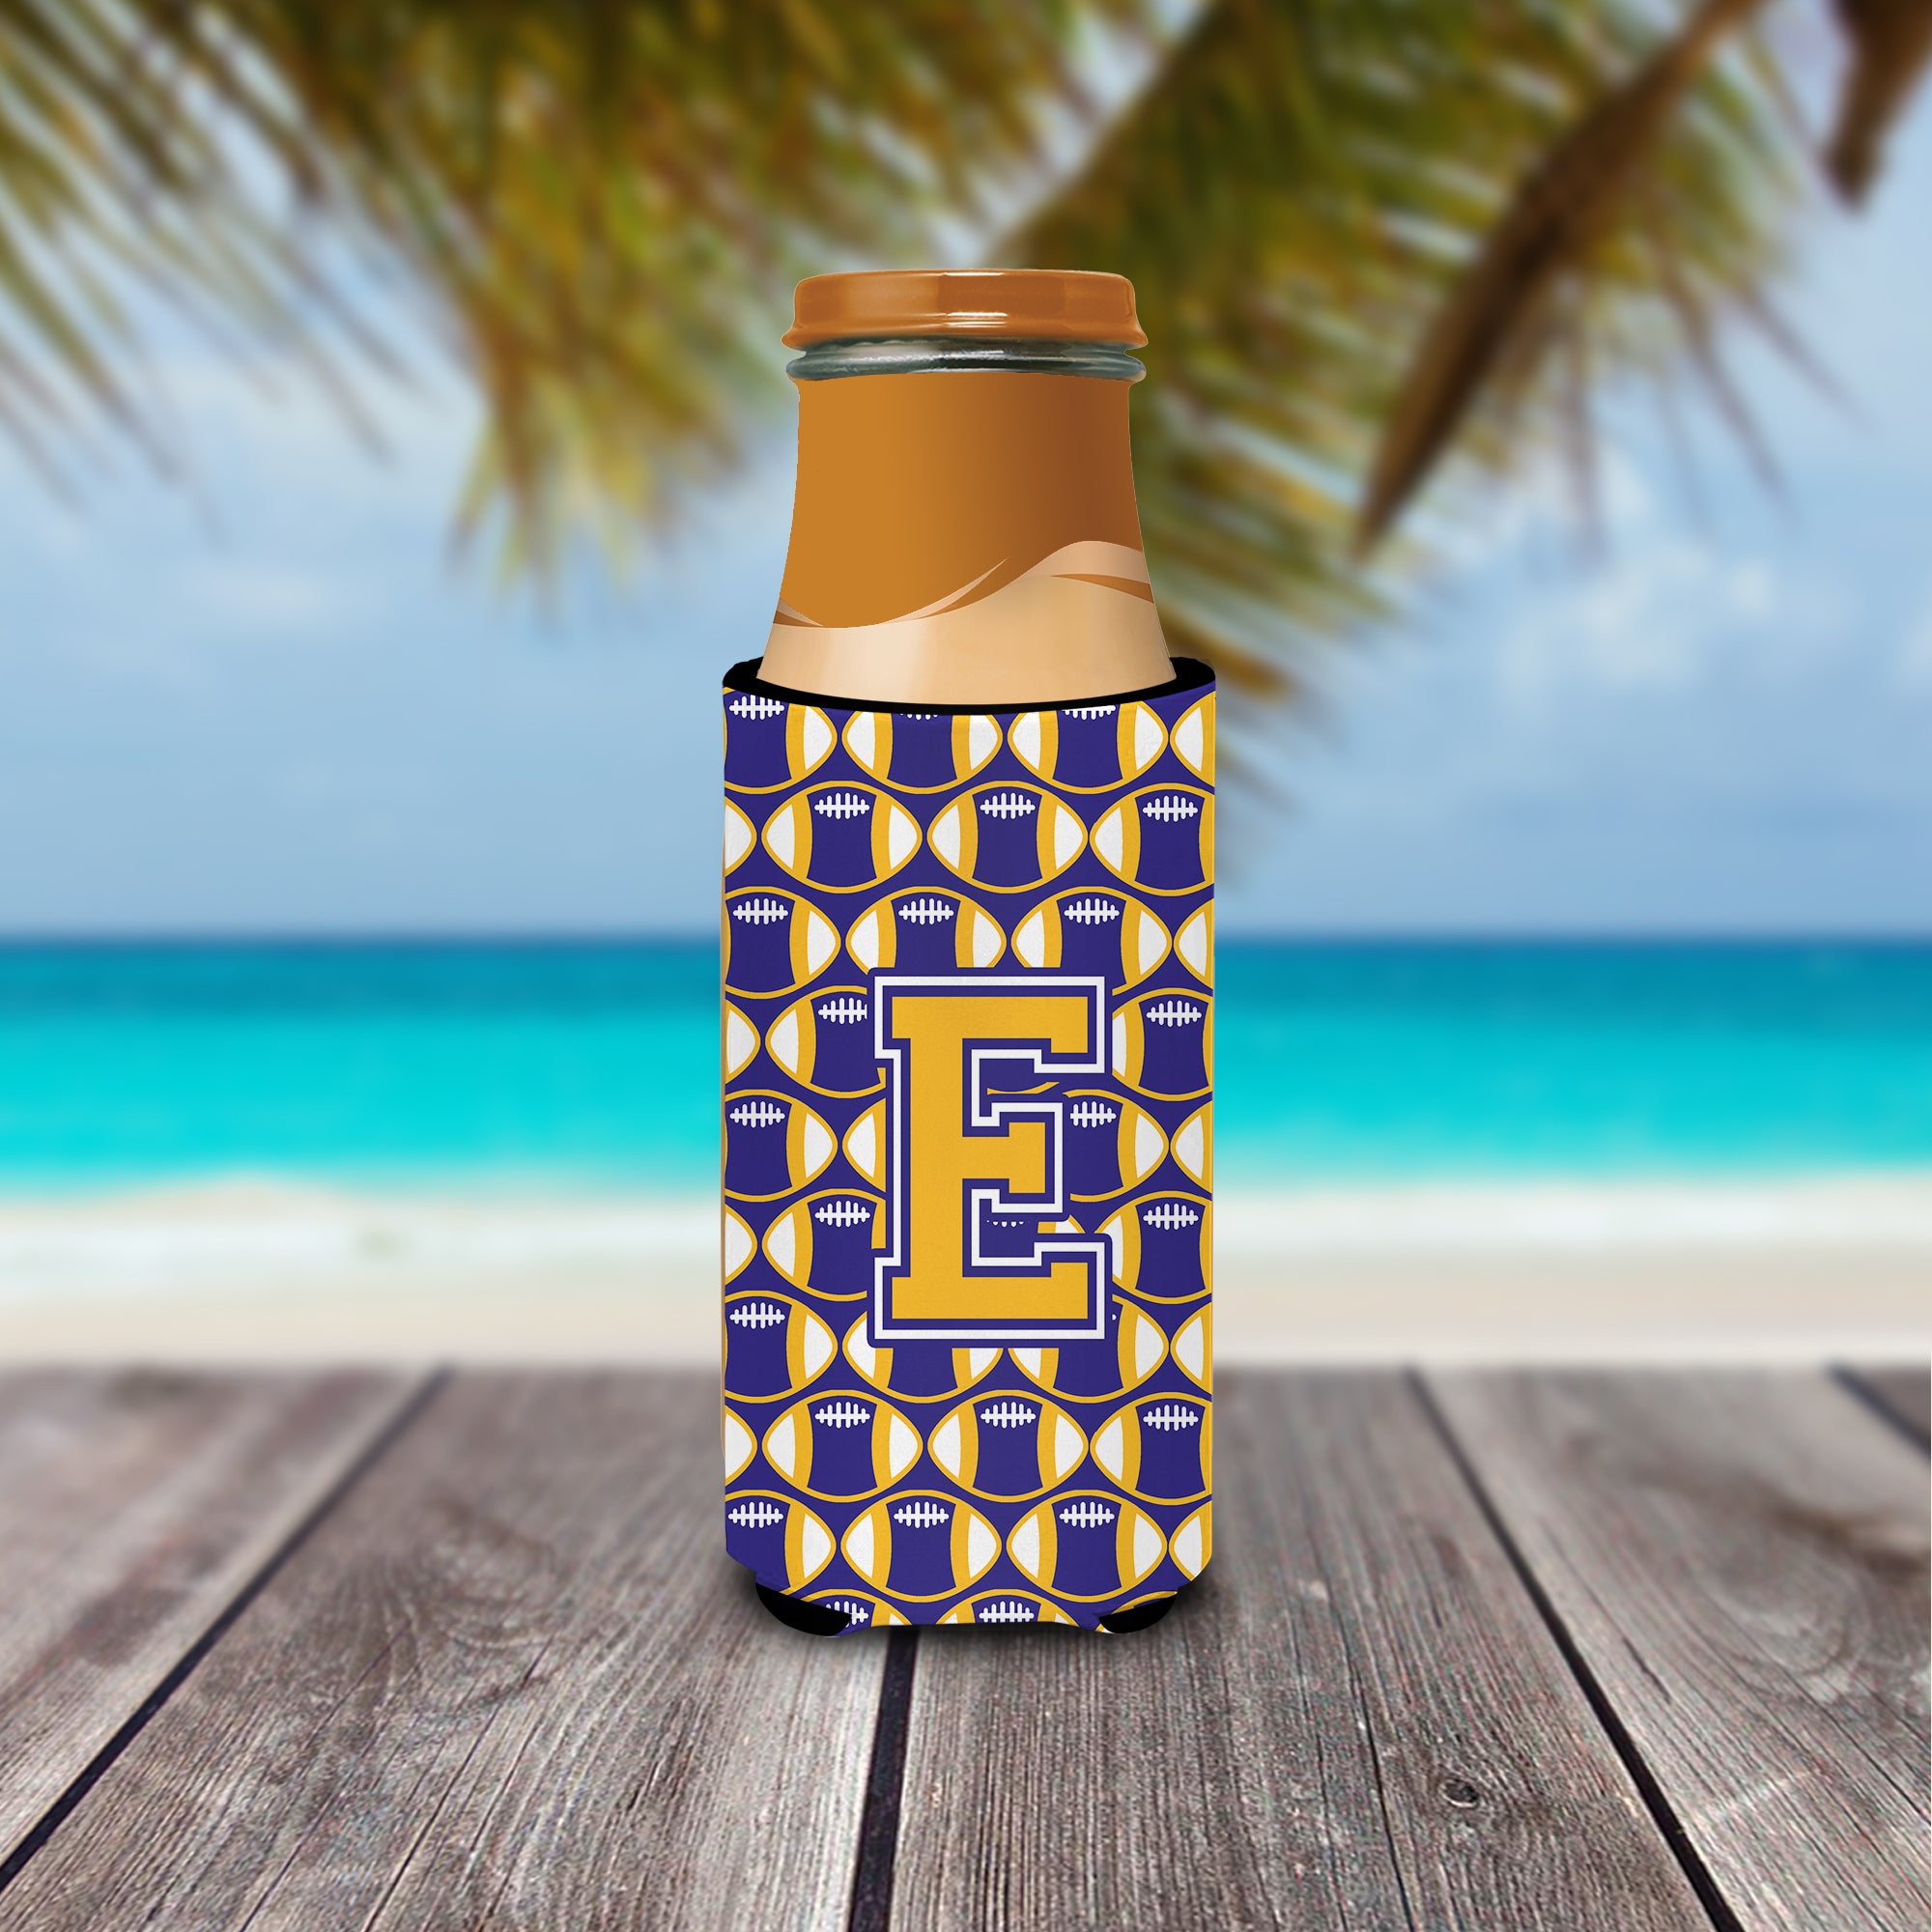 Letter E Football Purple and Gold Ultra Beverage Insulators for slim cans CJ1064-EMUK.